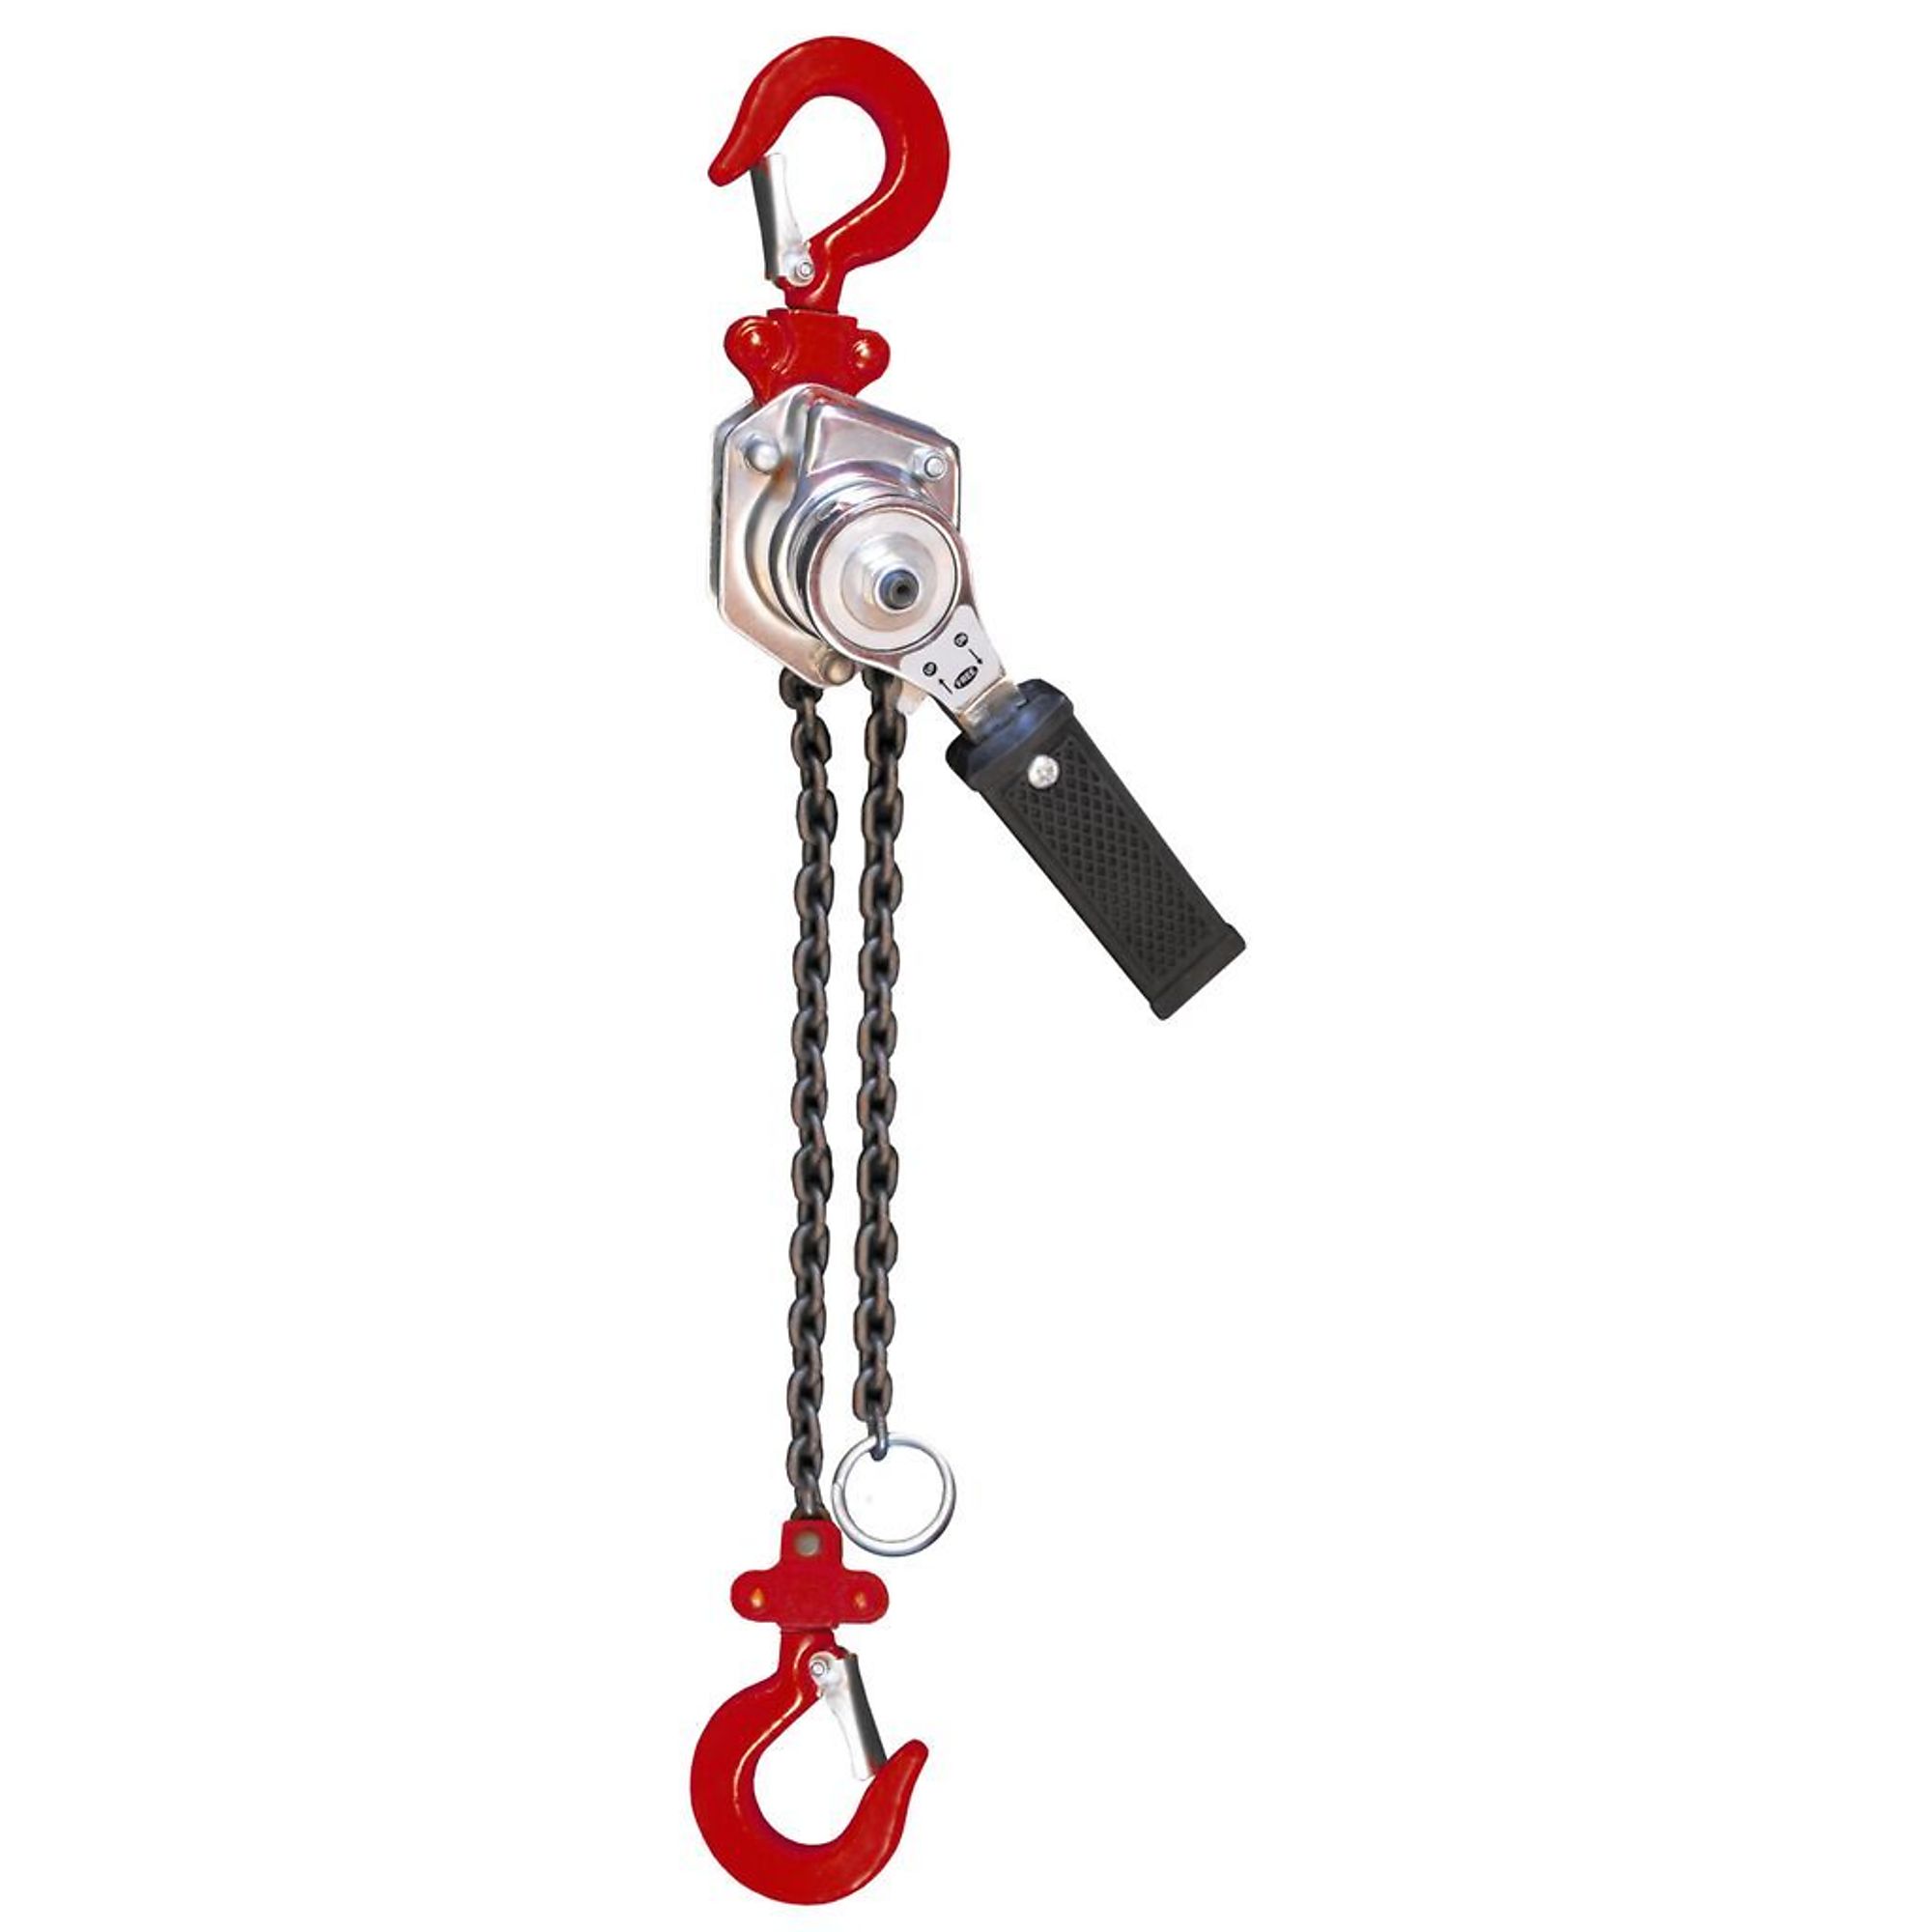 .25 ton chain puller, Power Source Manual Lever, Capacity 500 lb, Lift Height 5 ft, Model - American Power Pull 602